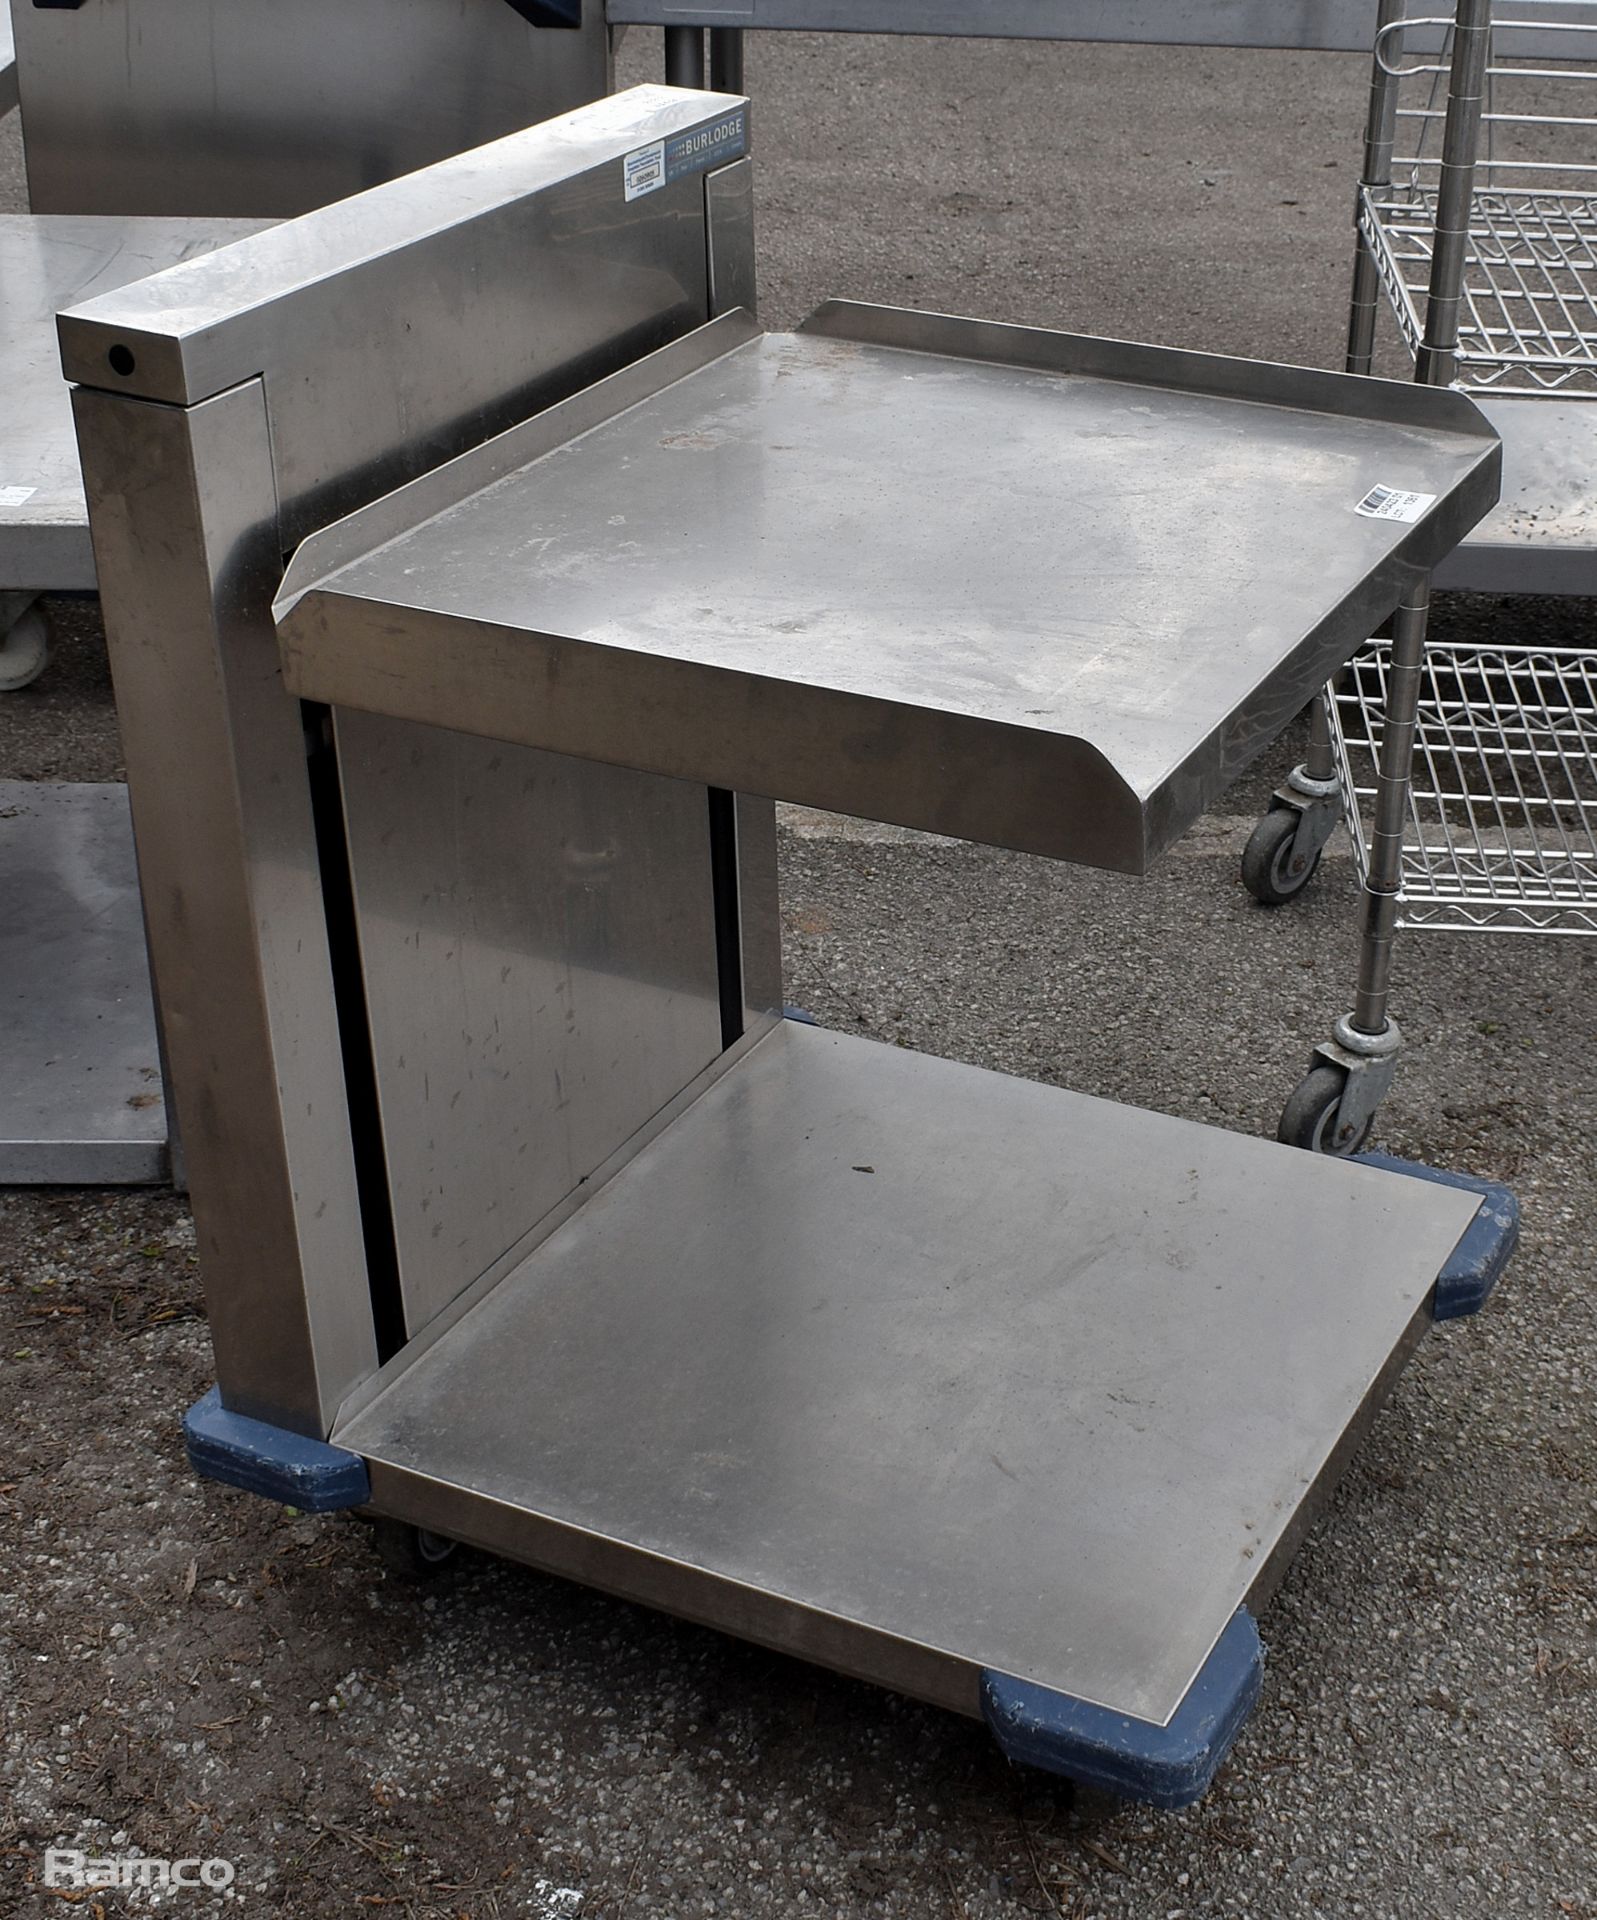 Burlodge stainless steel adjustable self-levelling tray trolley - W 650 x D 770 x H 935mm - Image 2 of 3